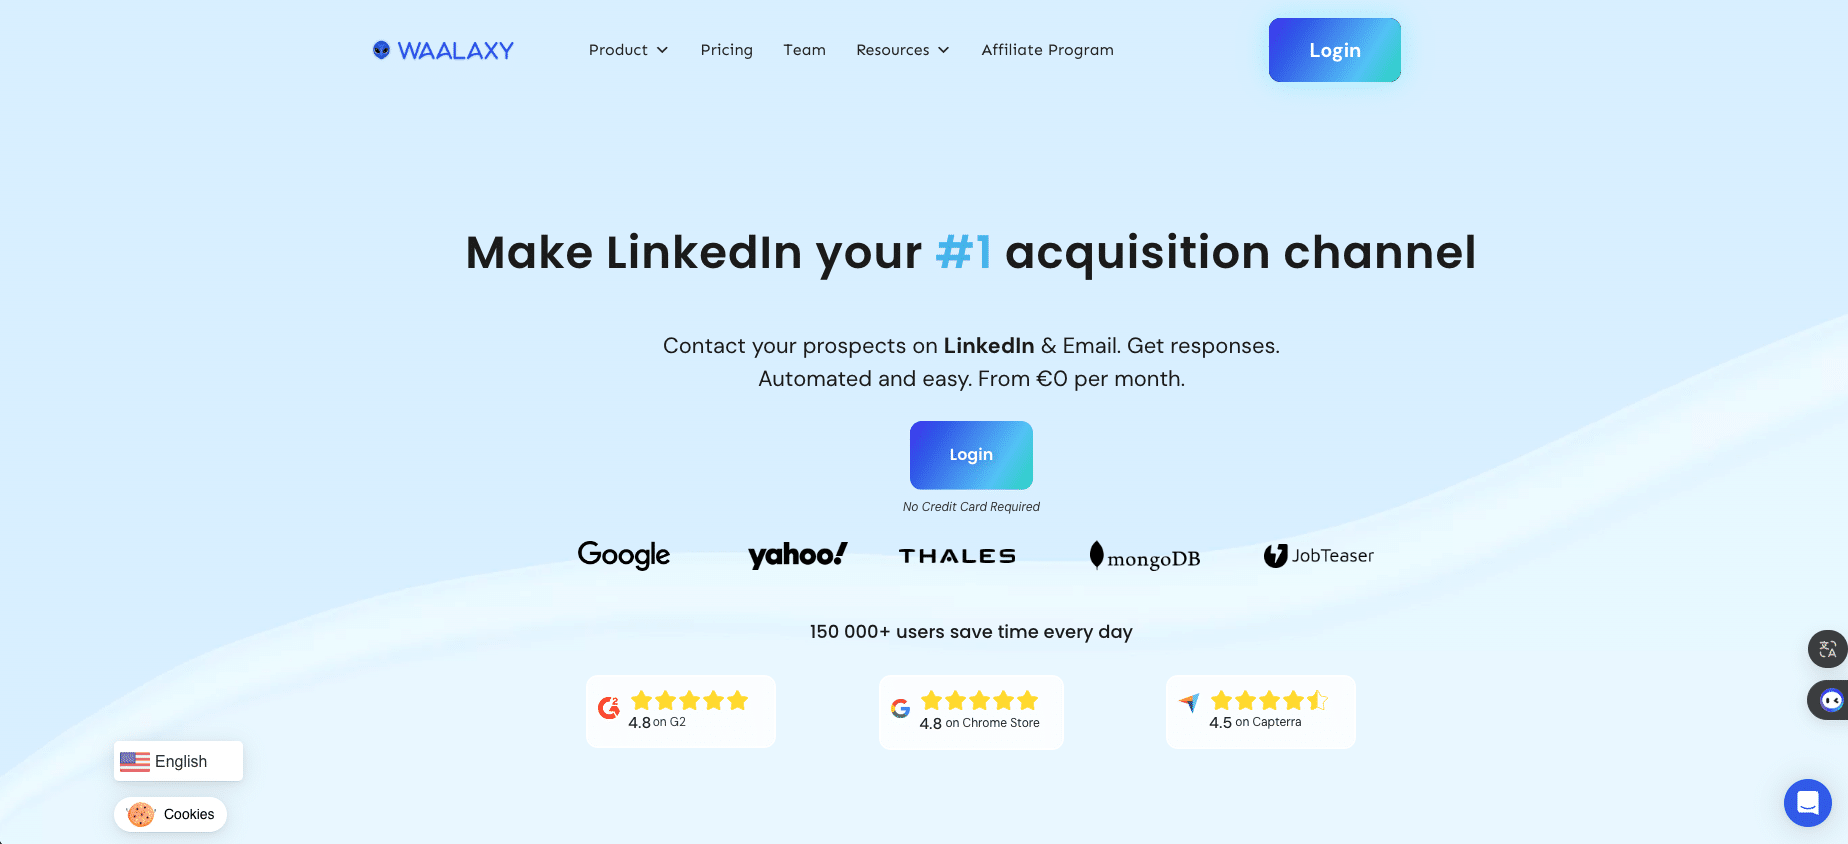 Overview of the homepage of the Waalaxy lead acquisition tool.